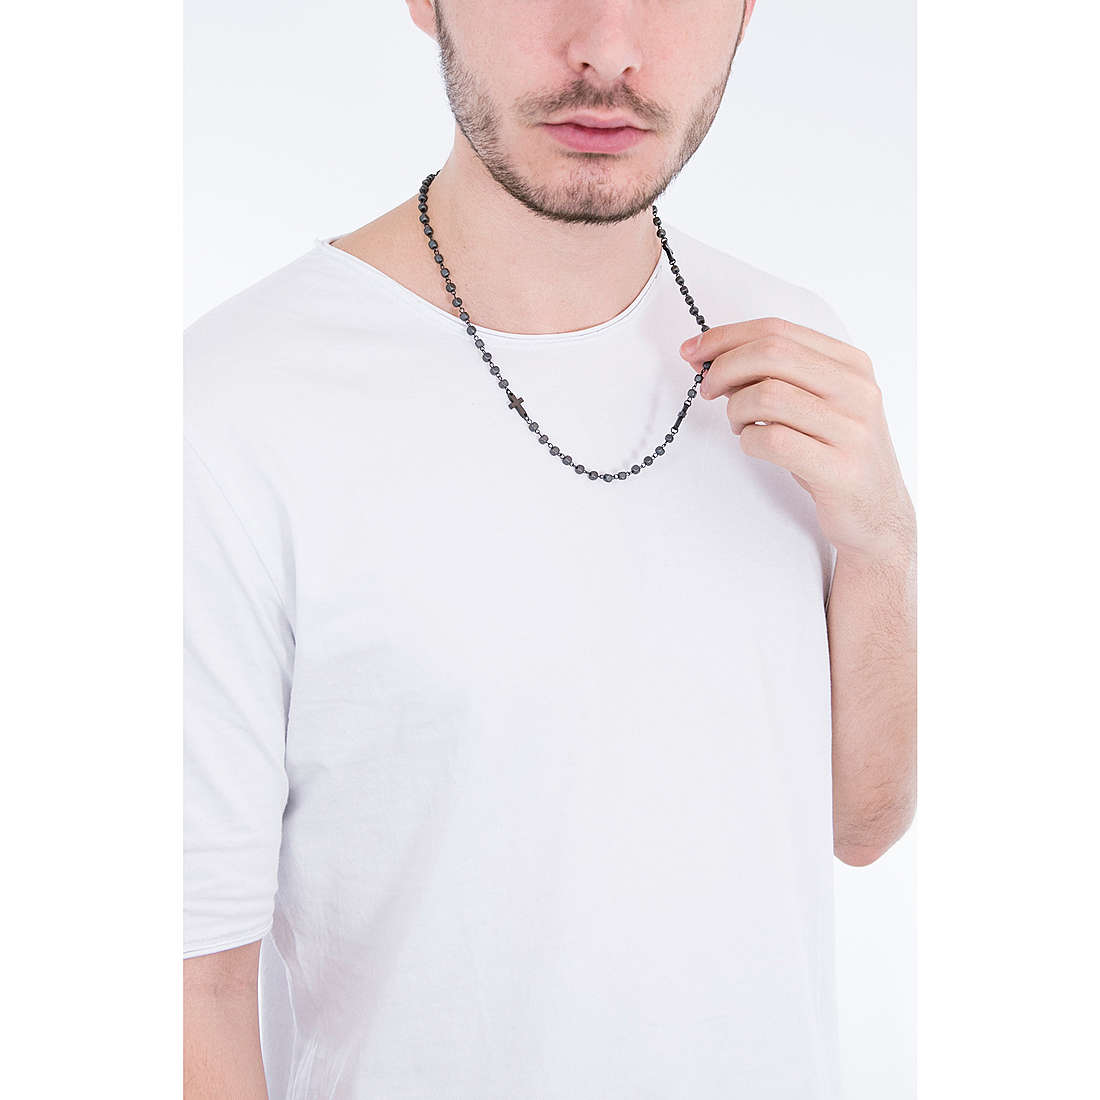 2Jewels necklaces Faith man 251679 wearing